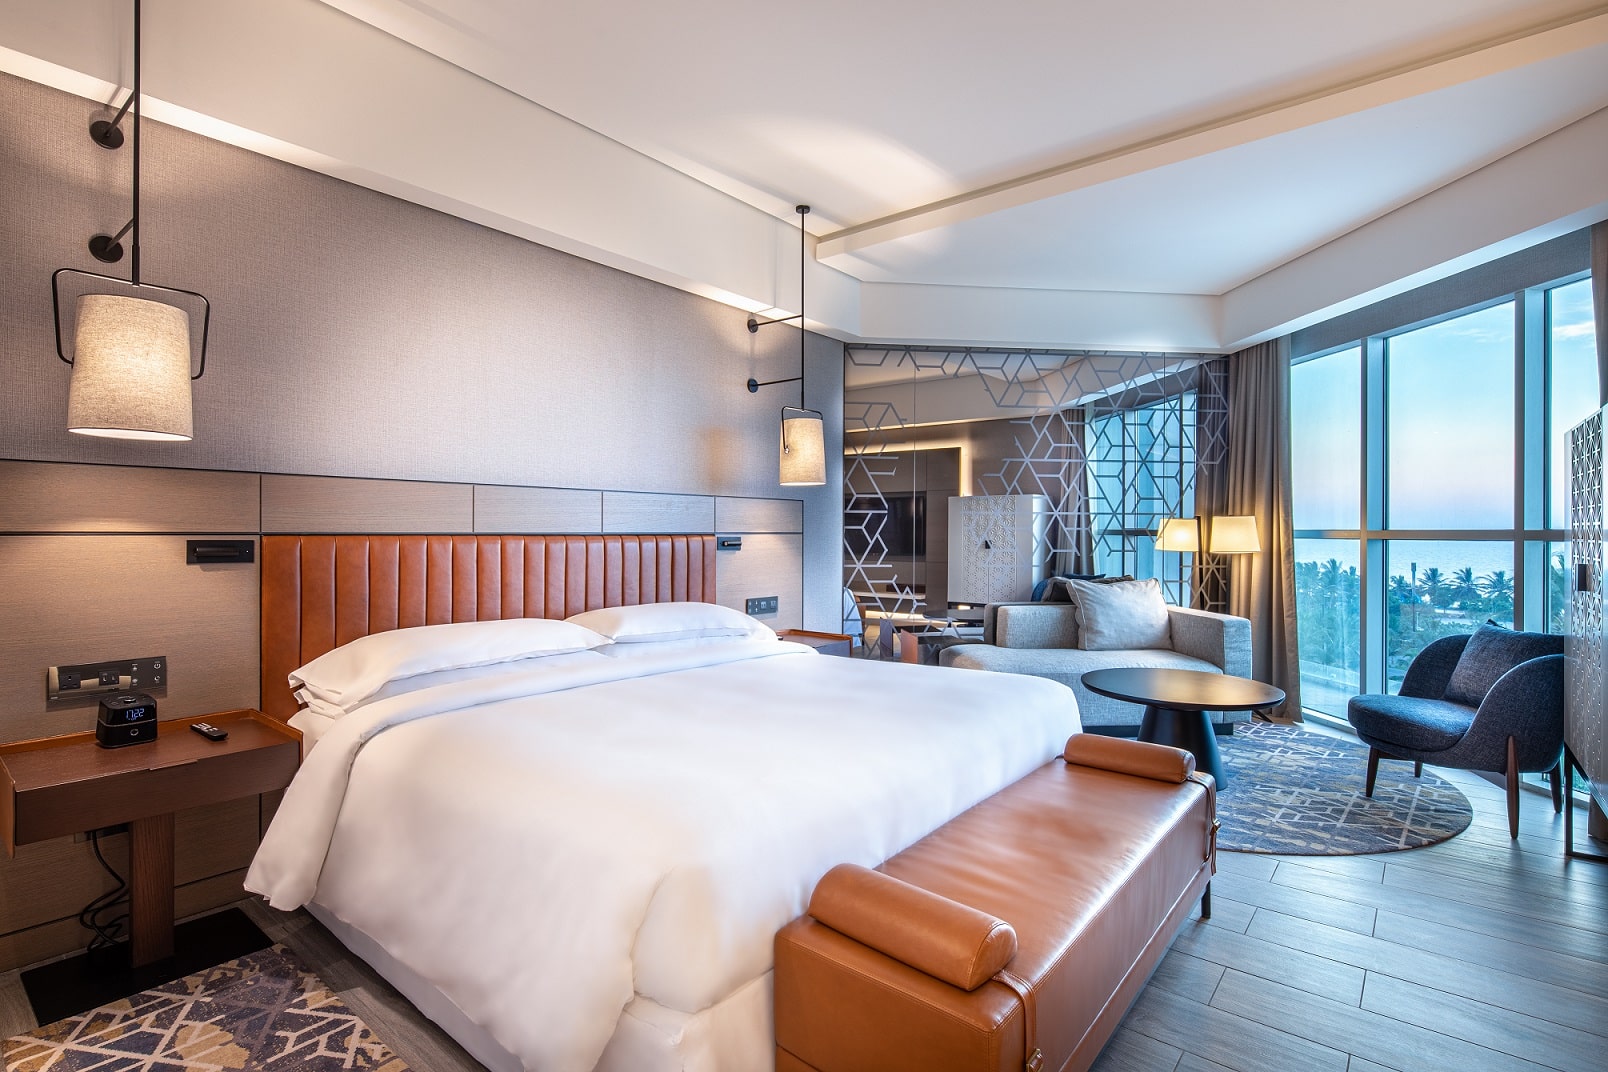 Tablet Hotels' Sustainability Program Gains Momentum :: Michelin North  America, Inc.